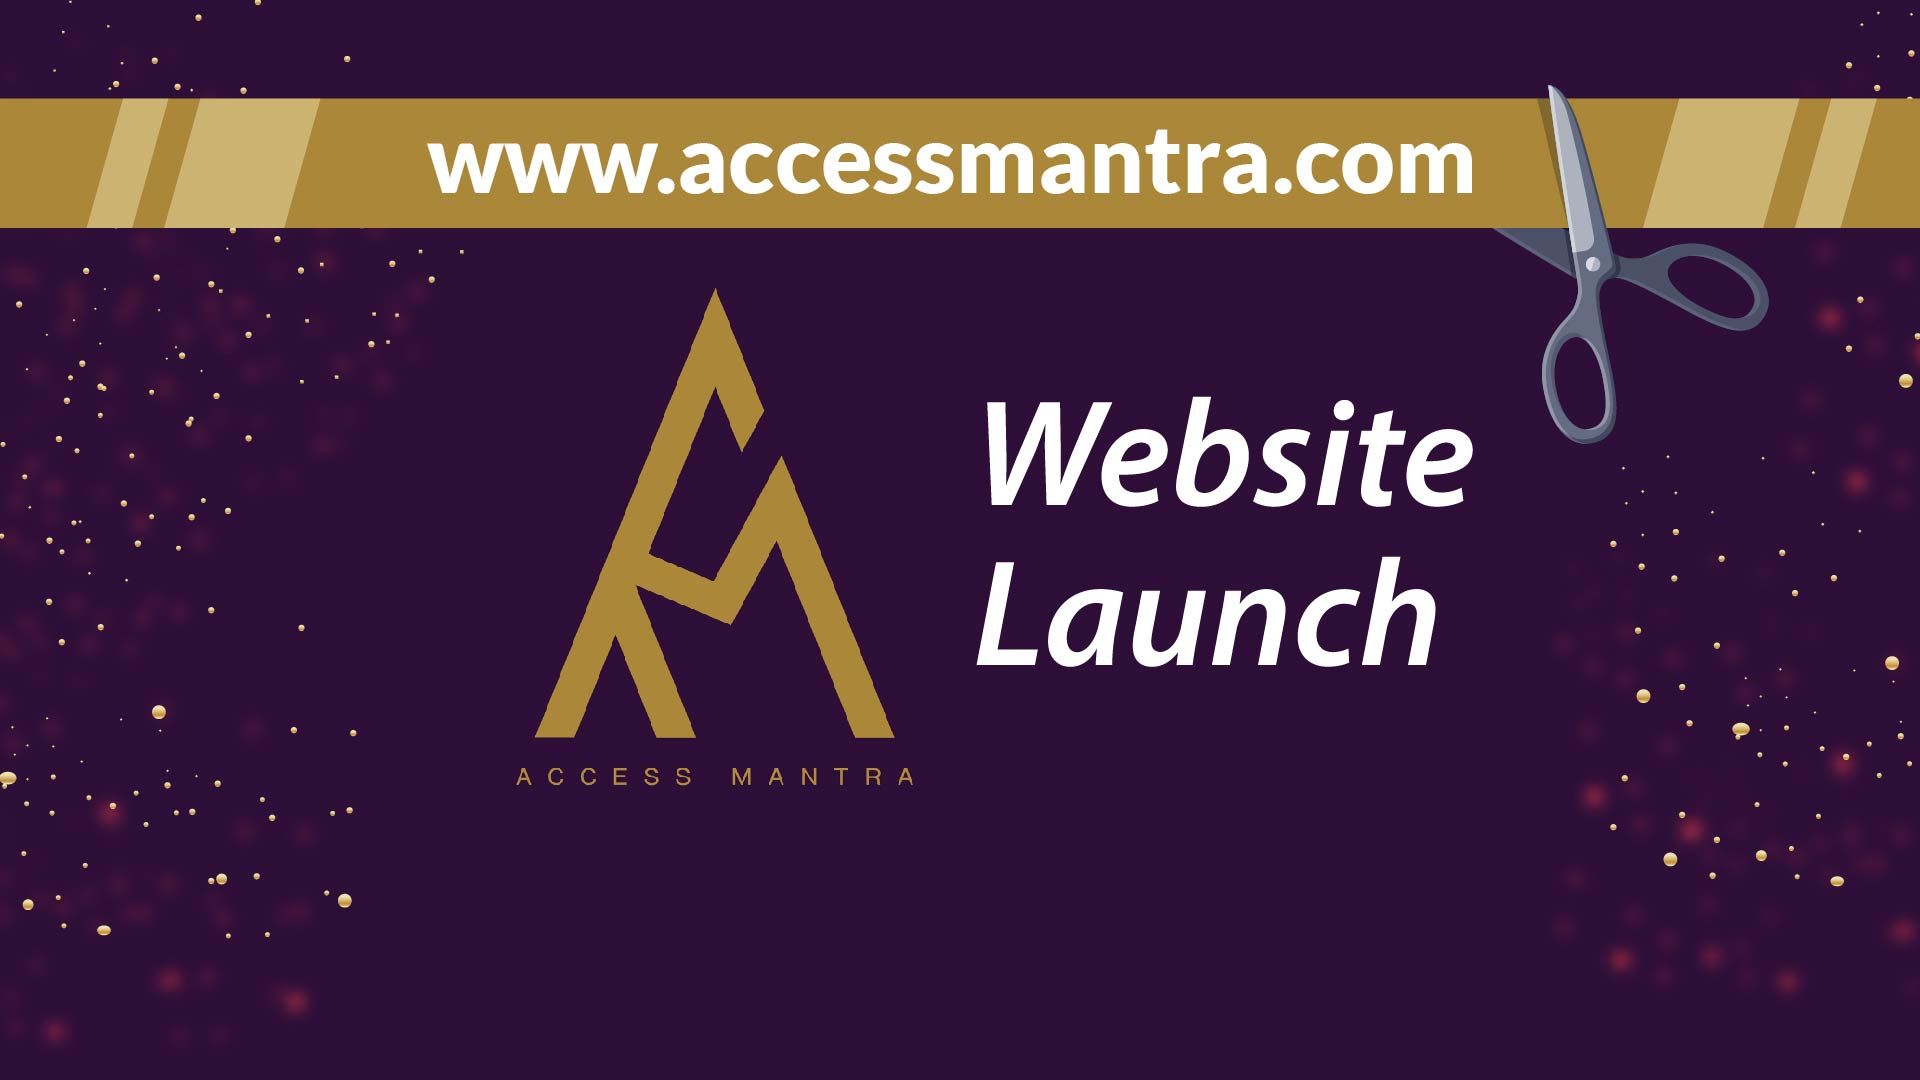 ‘Access Mantra’ The Answer To All Your Questions